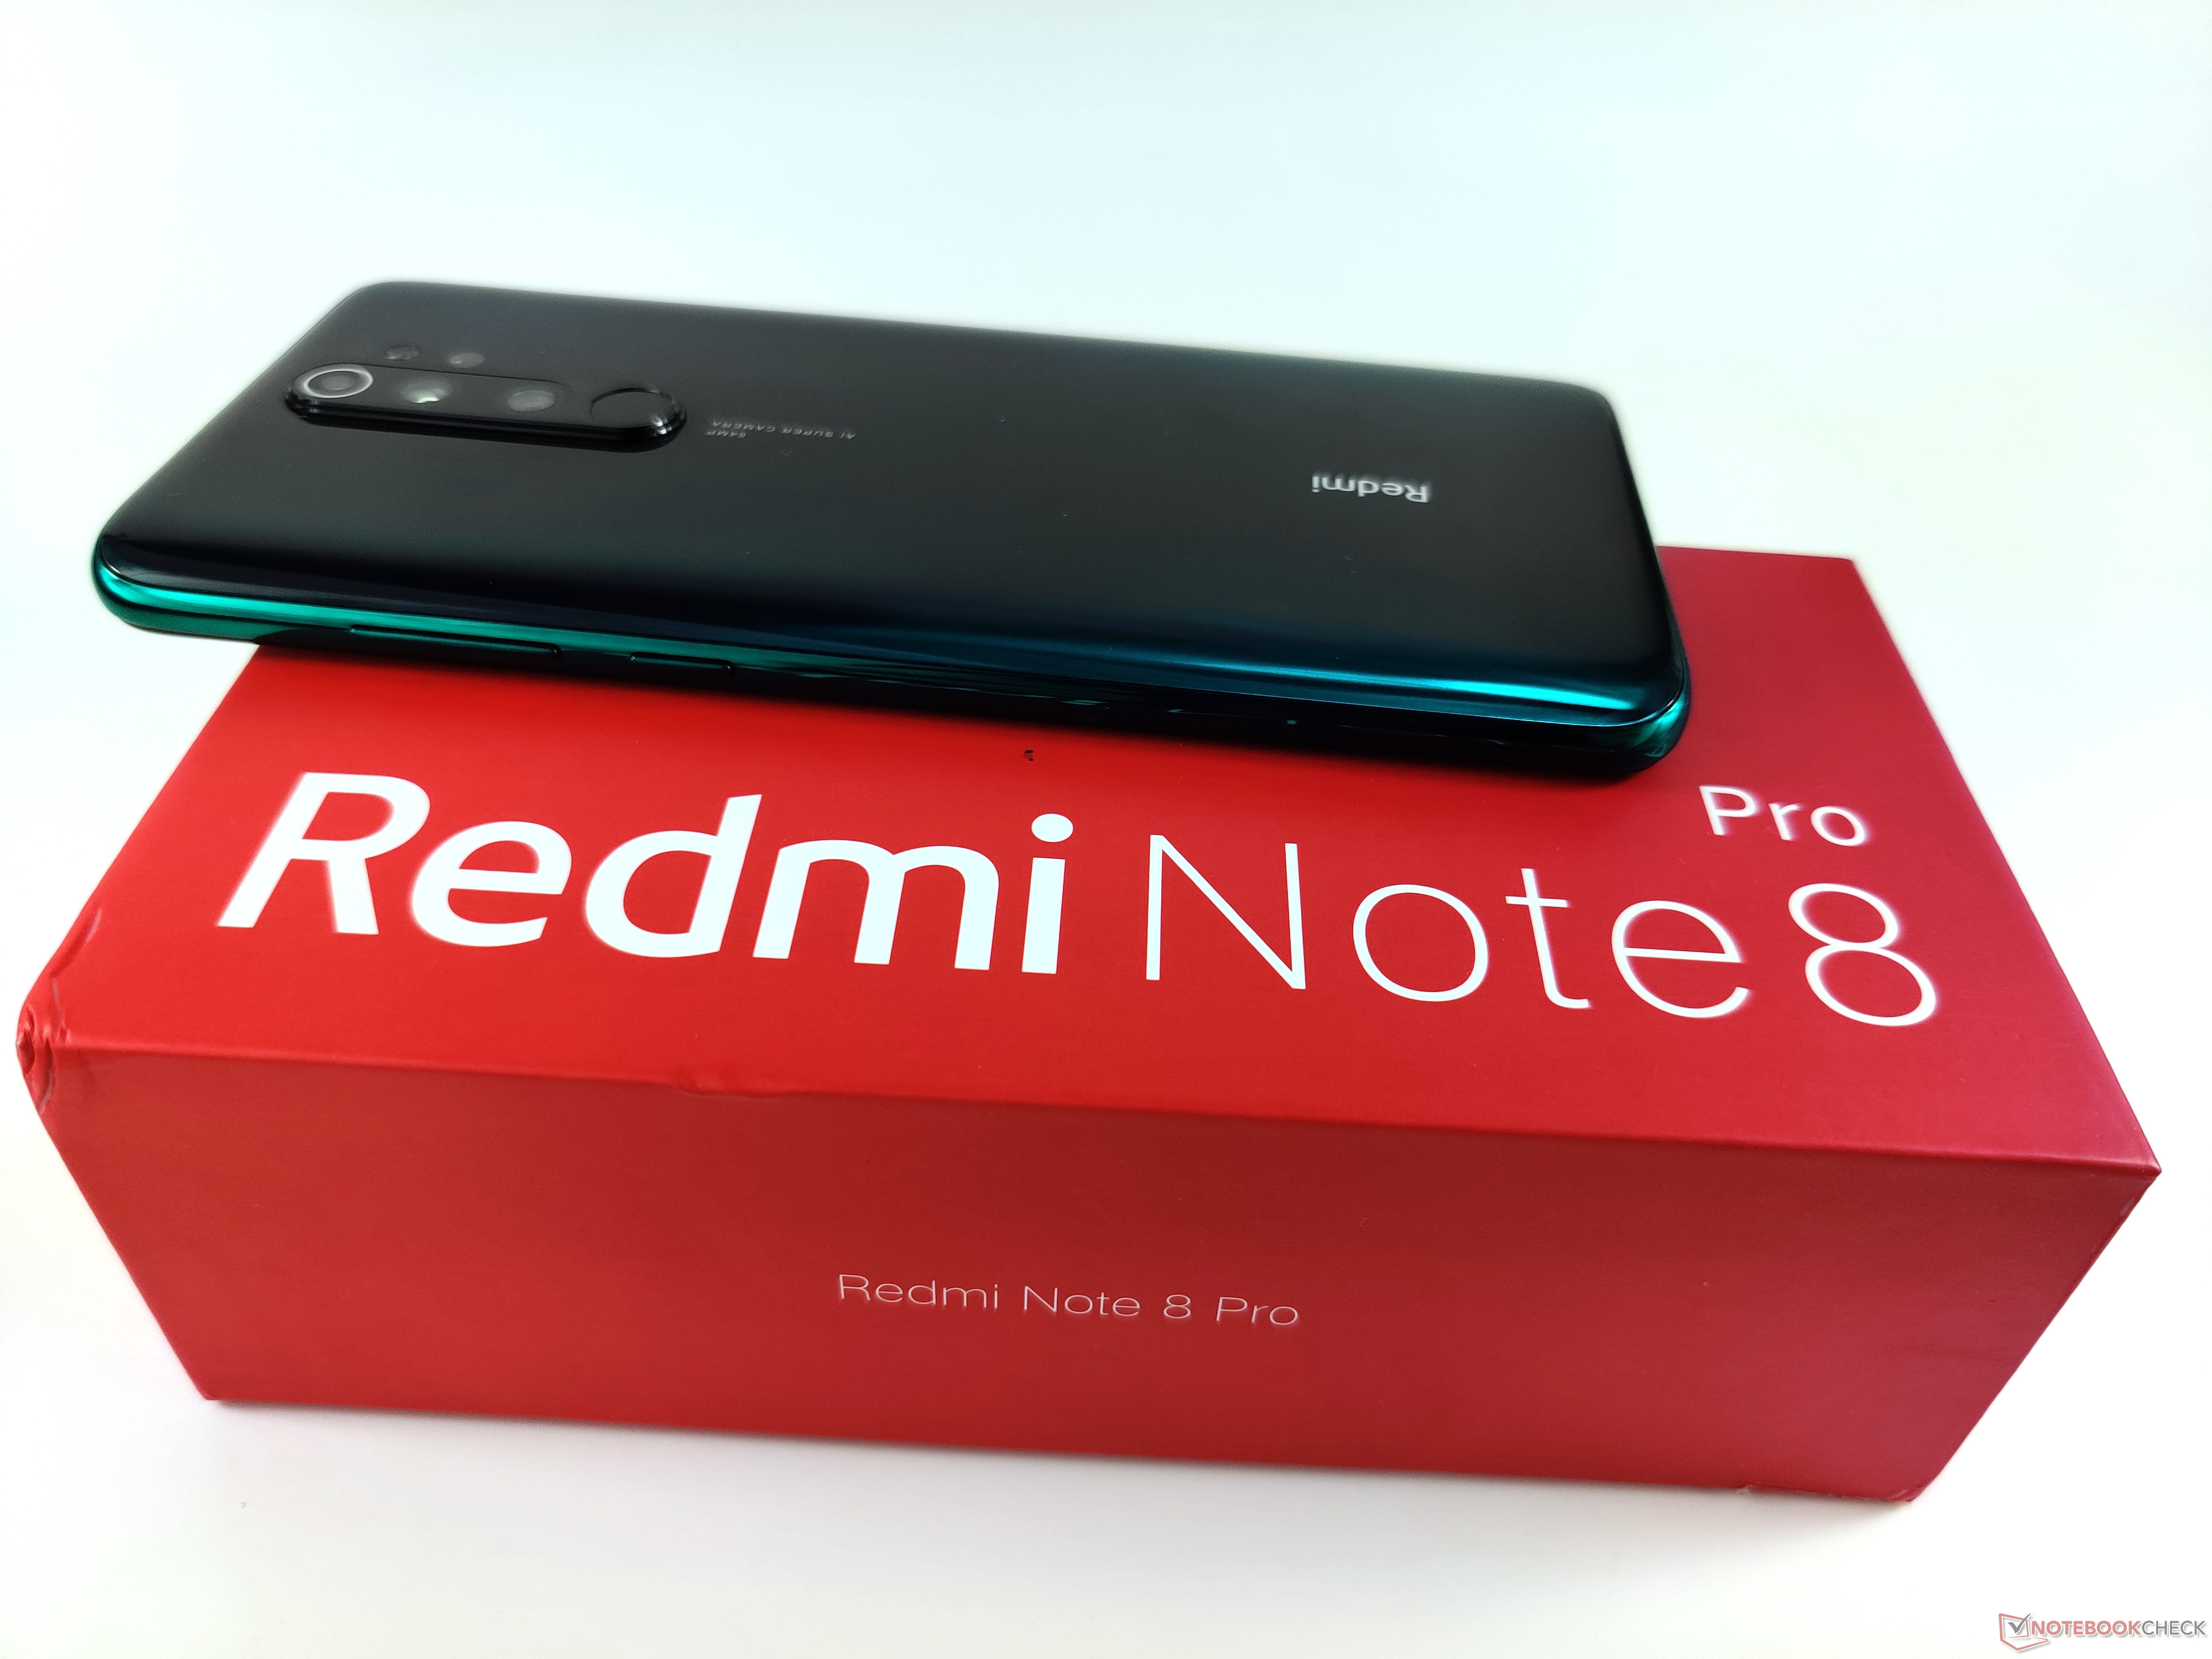 The Redmi Note 8 Pro is not a good choice for smartphone gamers